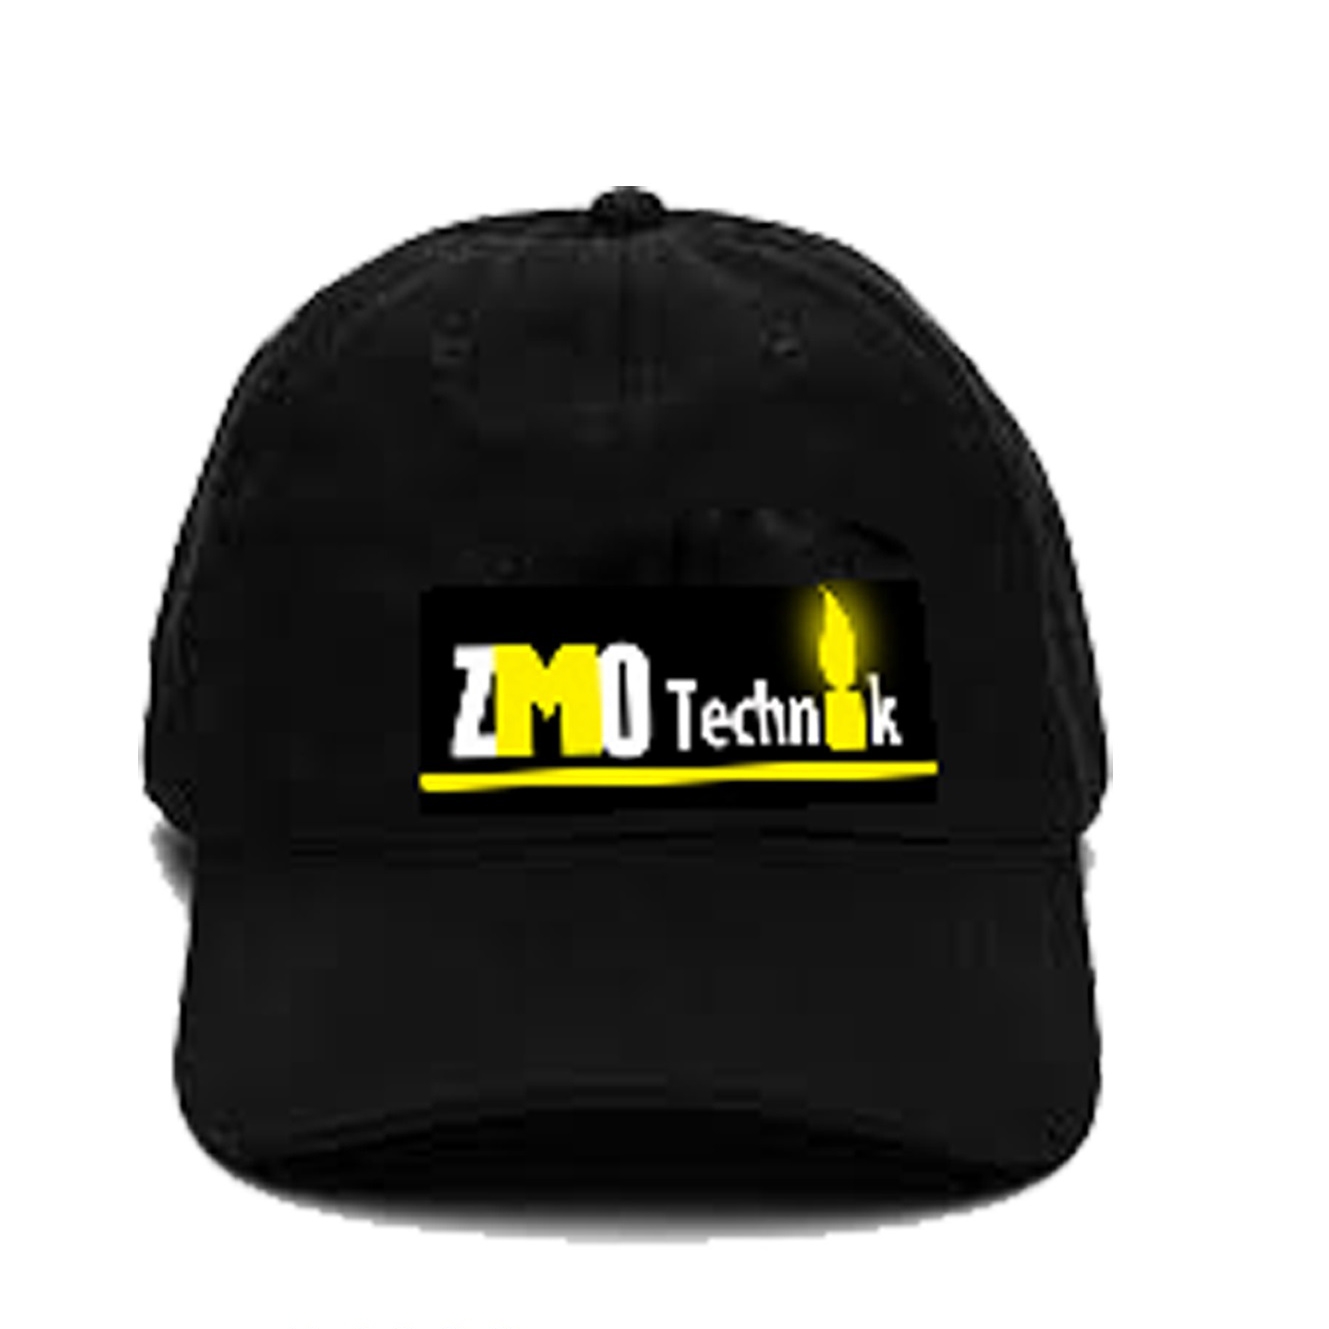 ZmoTechnik%20Cap%20(%20can%20be%20customized%20with%20your%20logo%20and%20colors)